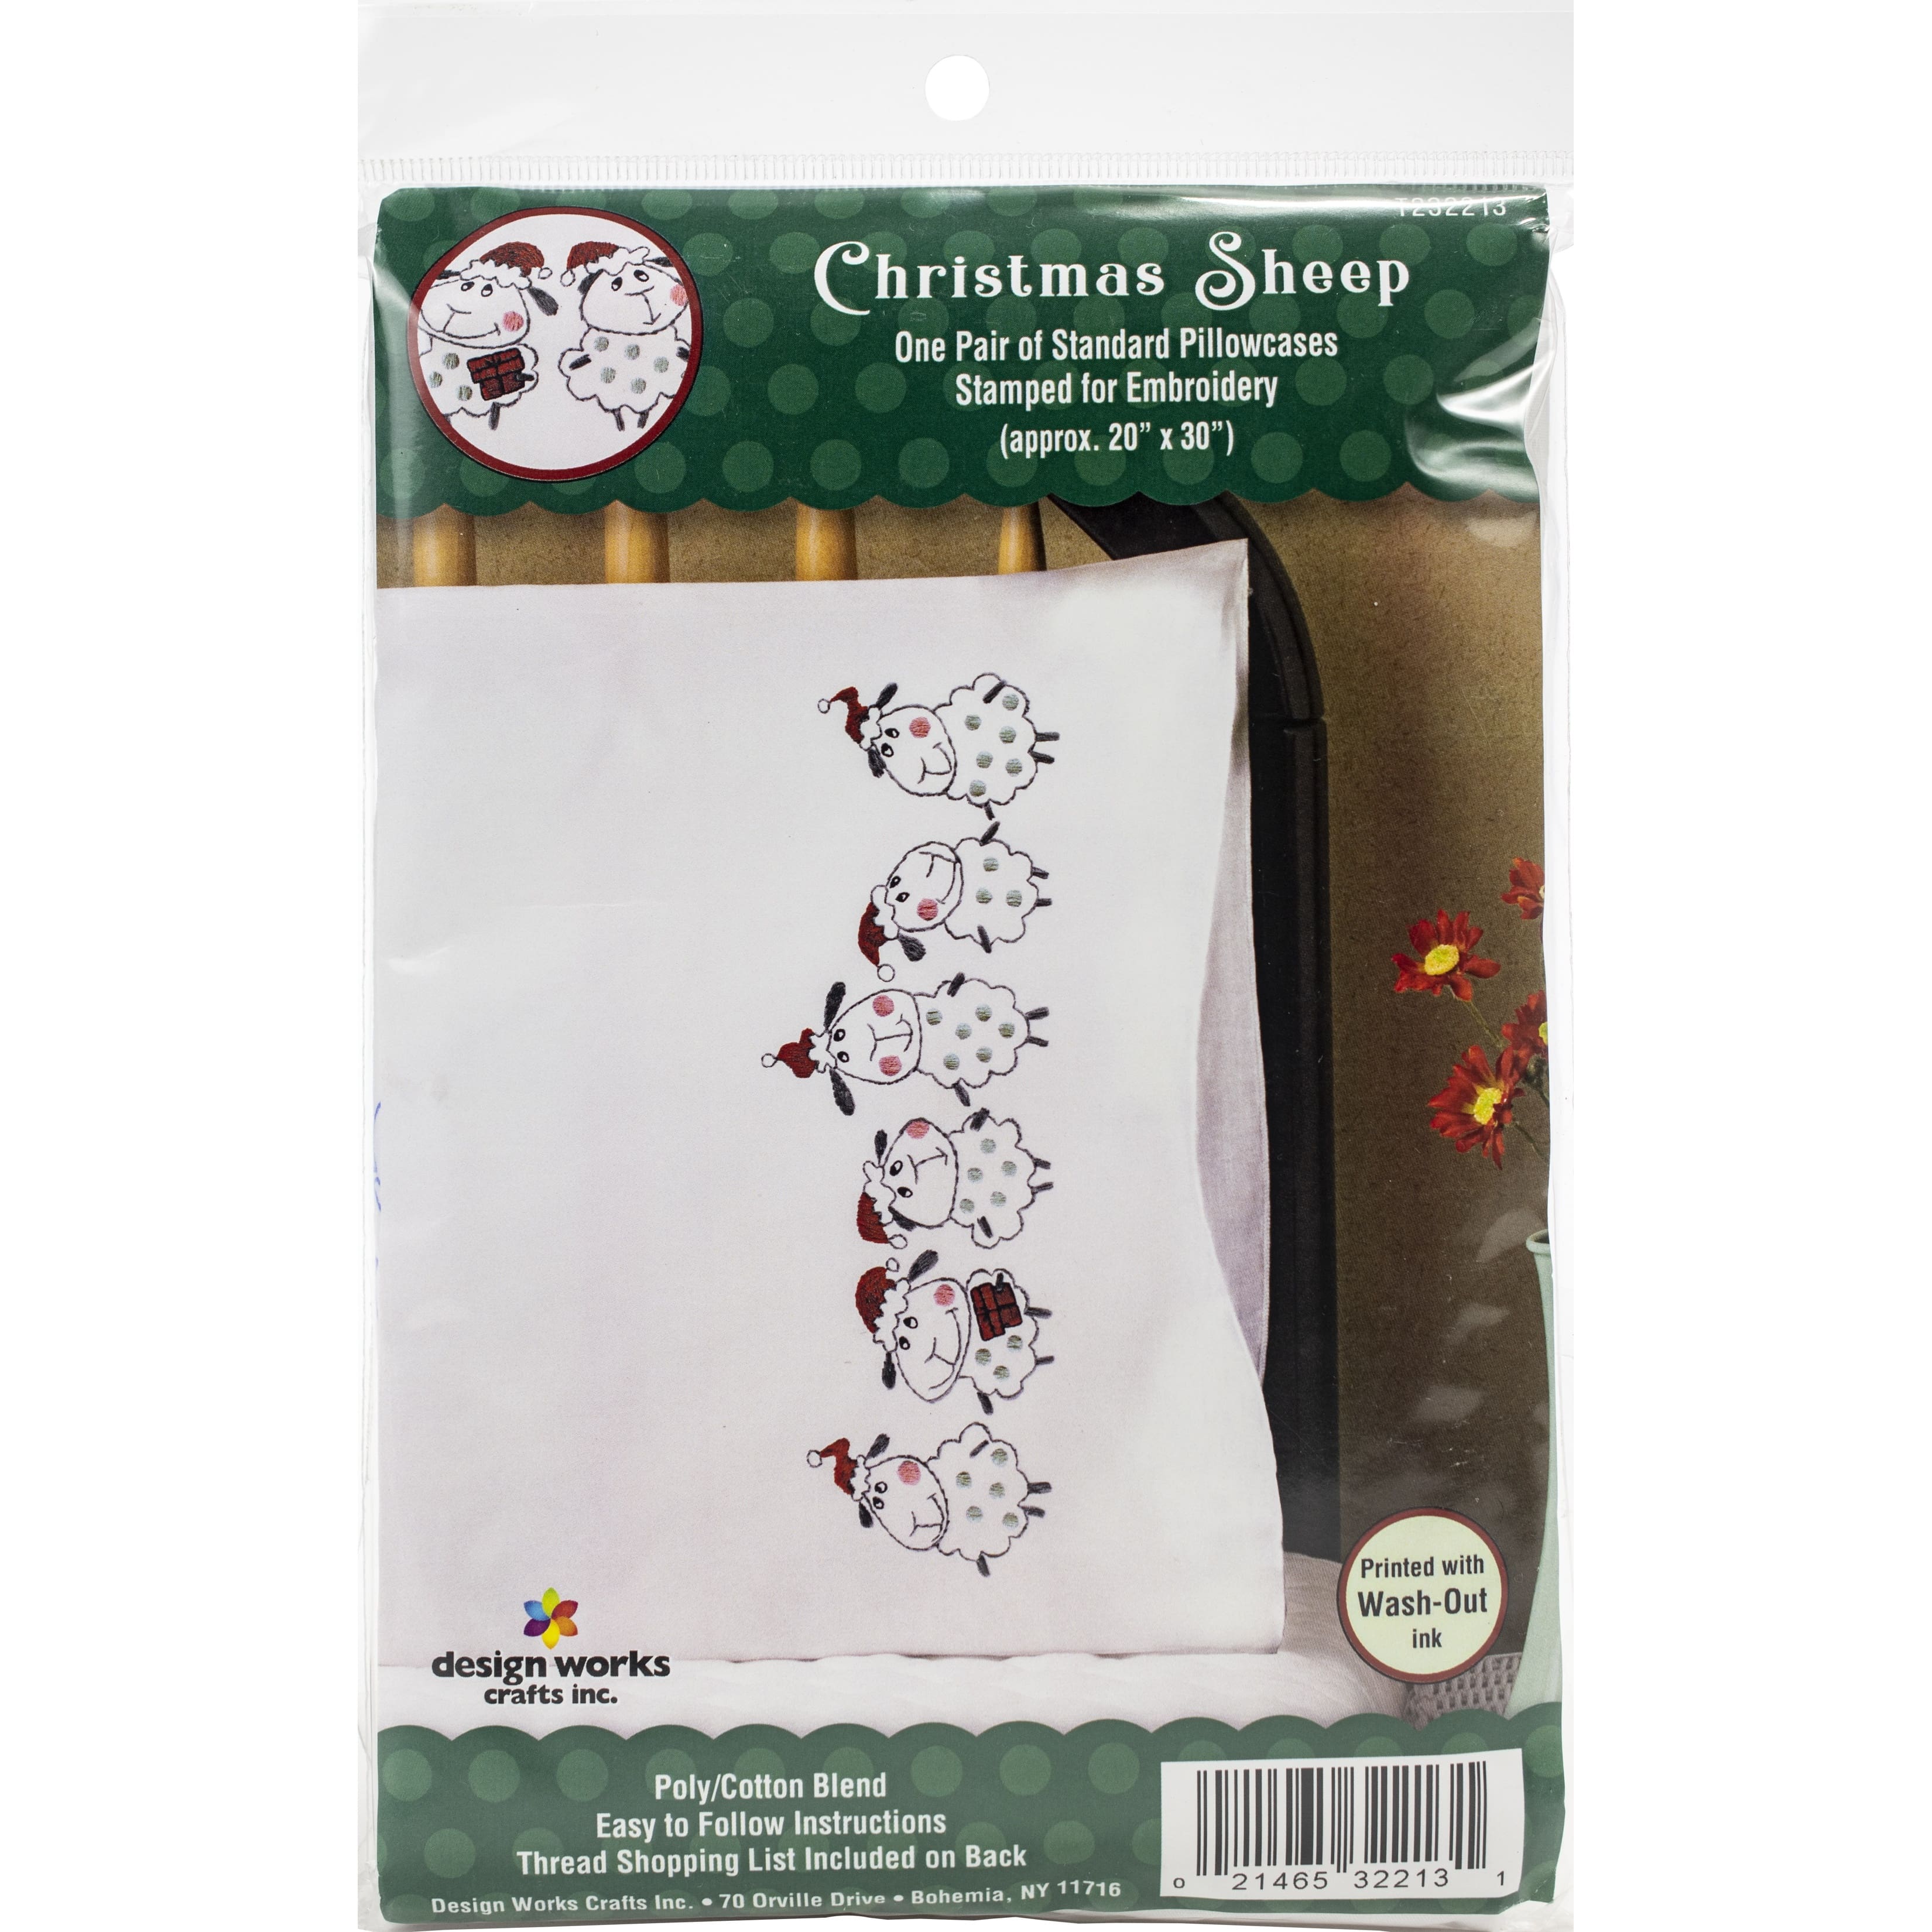 Tobin Christmas Sheep Stamped For Embroidery Pillowcase Pair